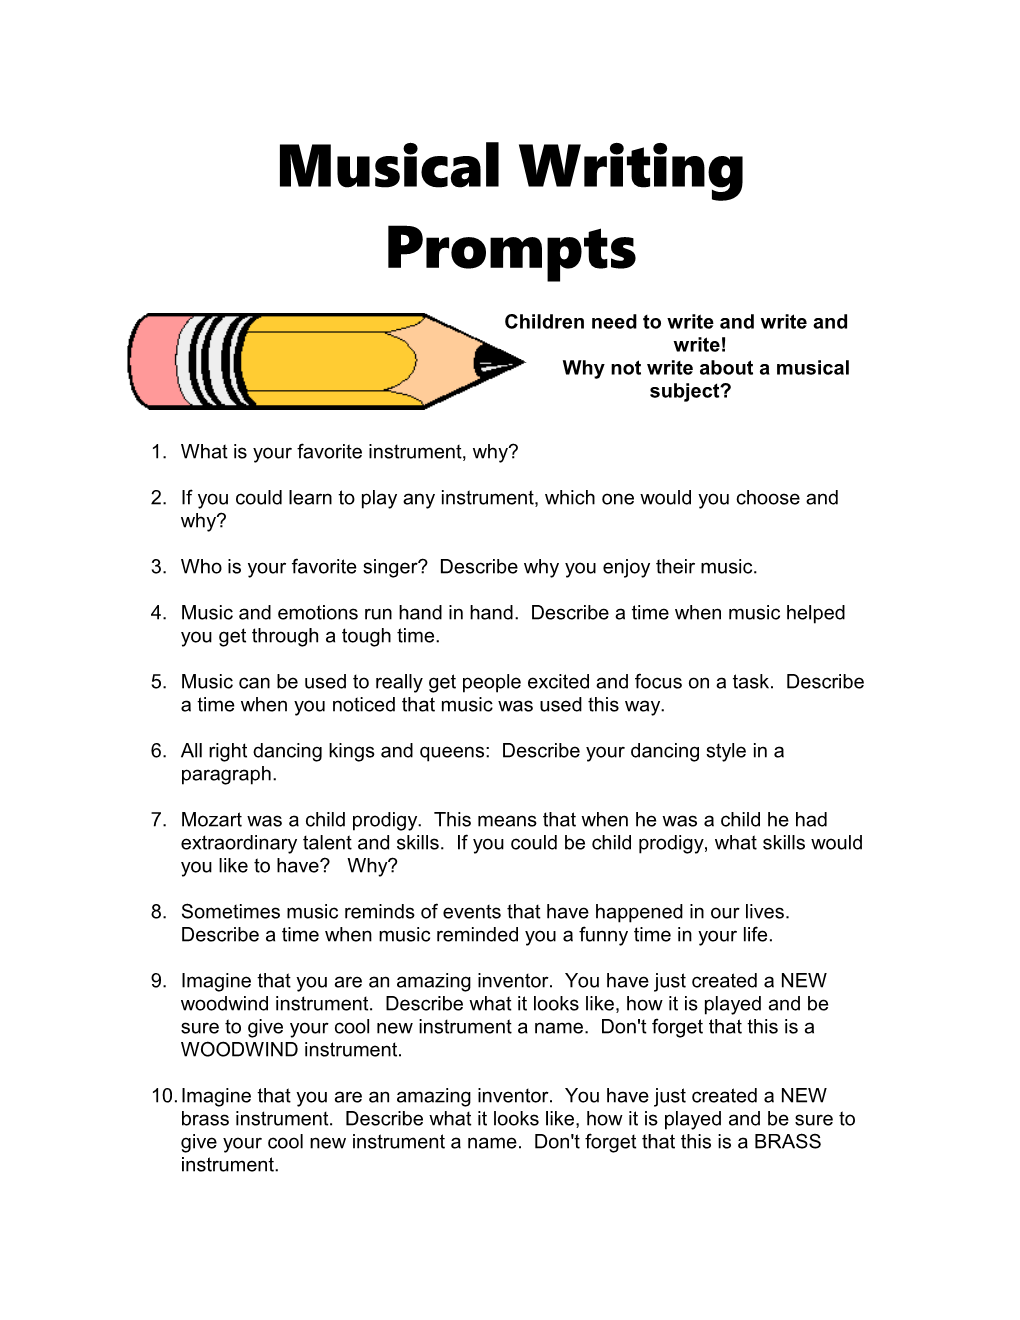 Musical Writing Prompts